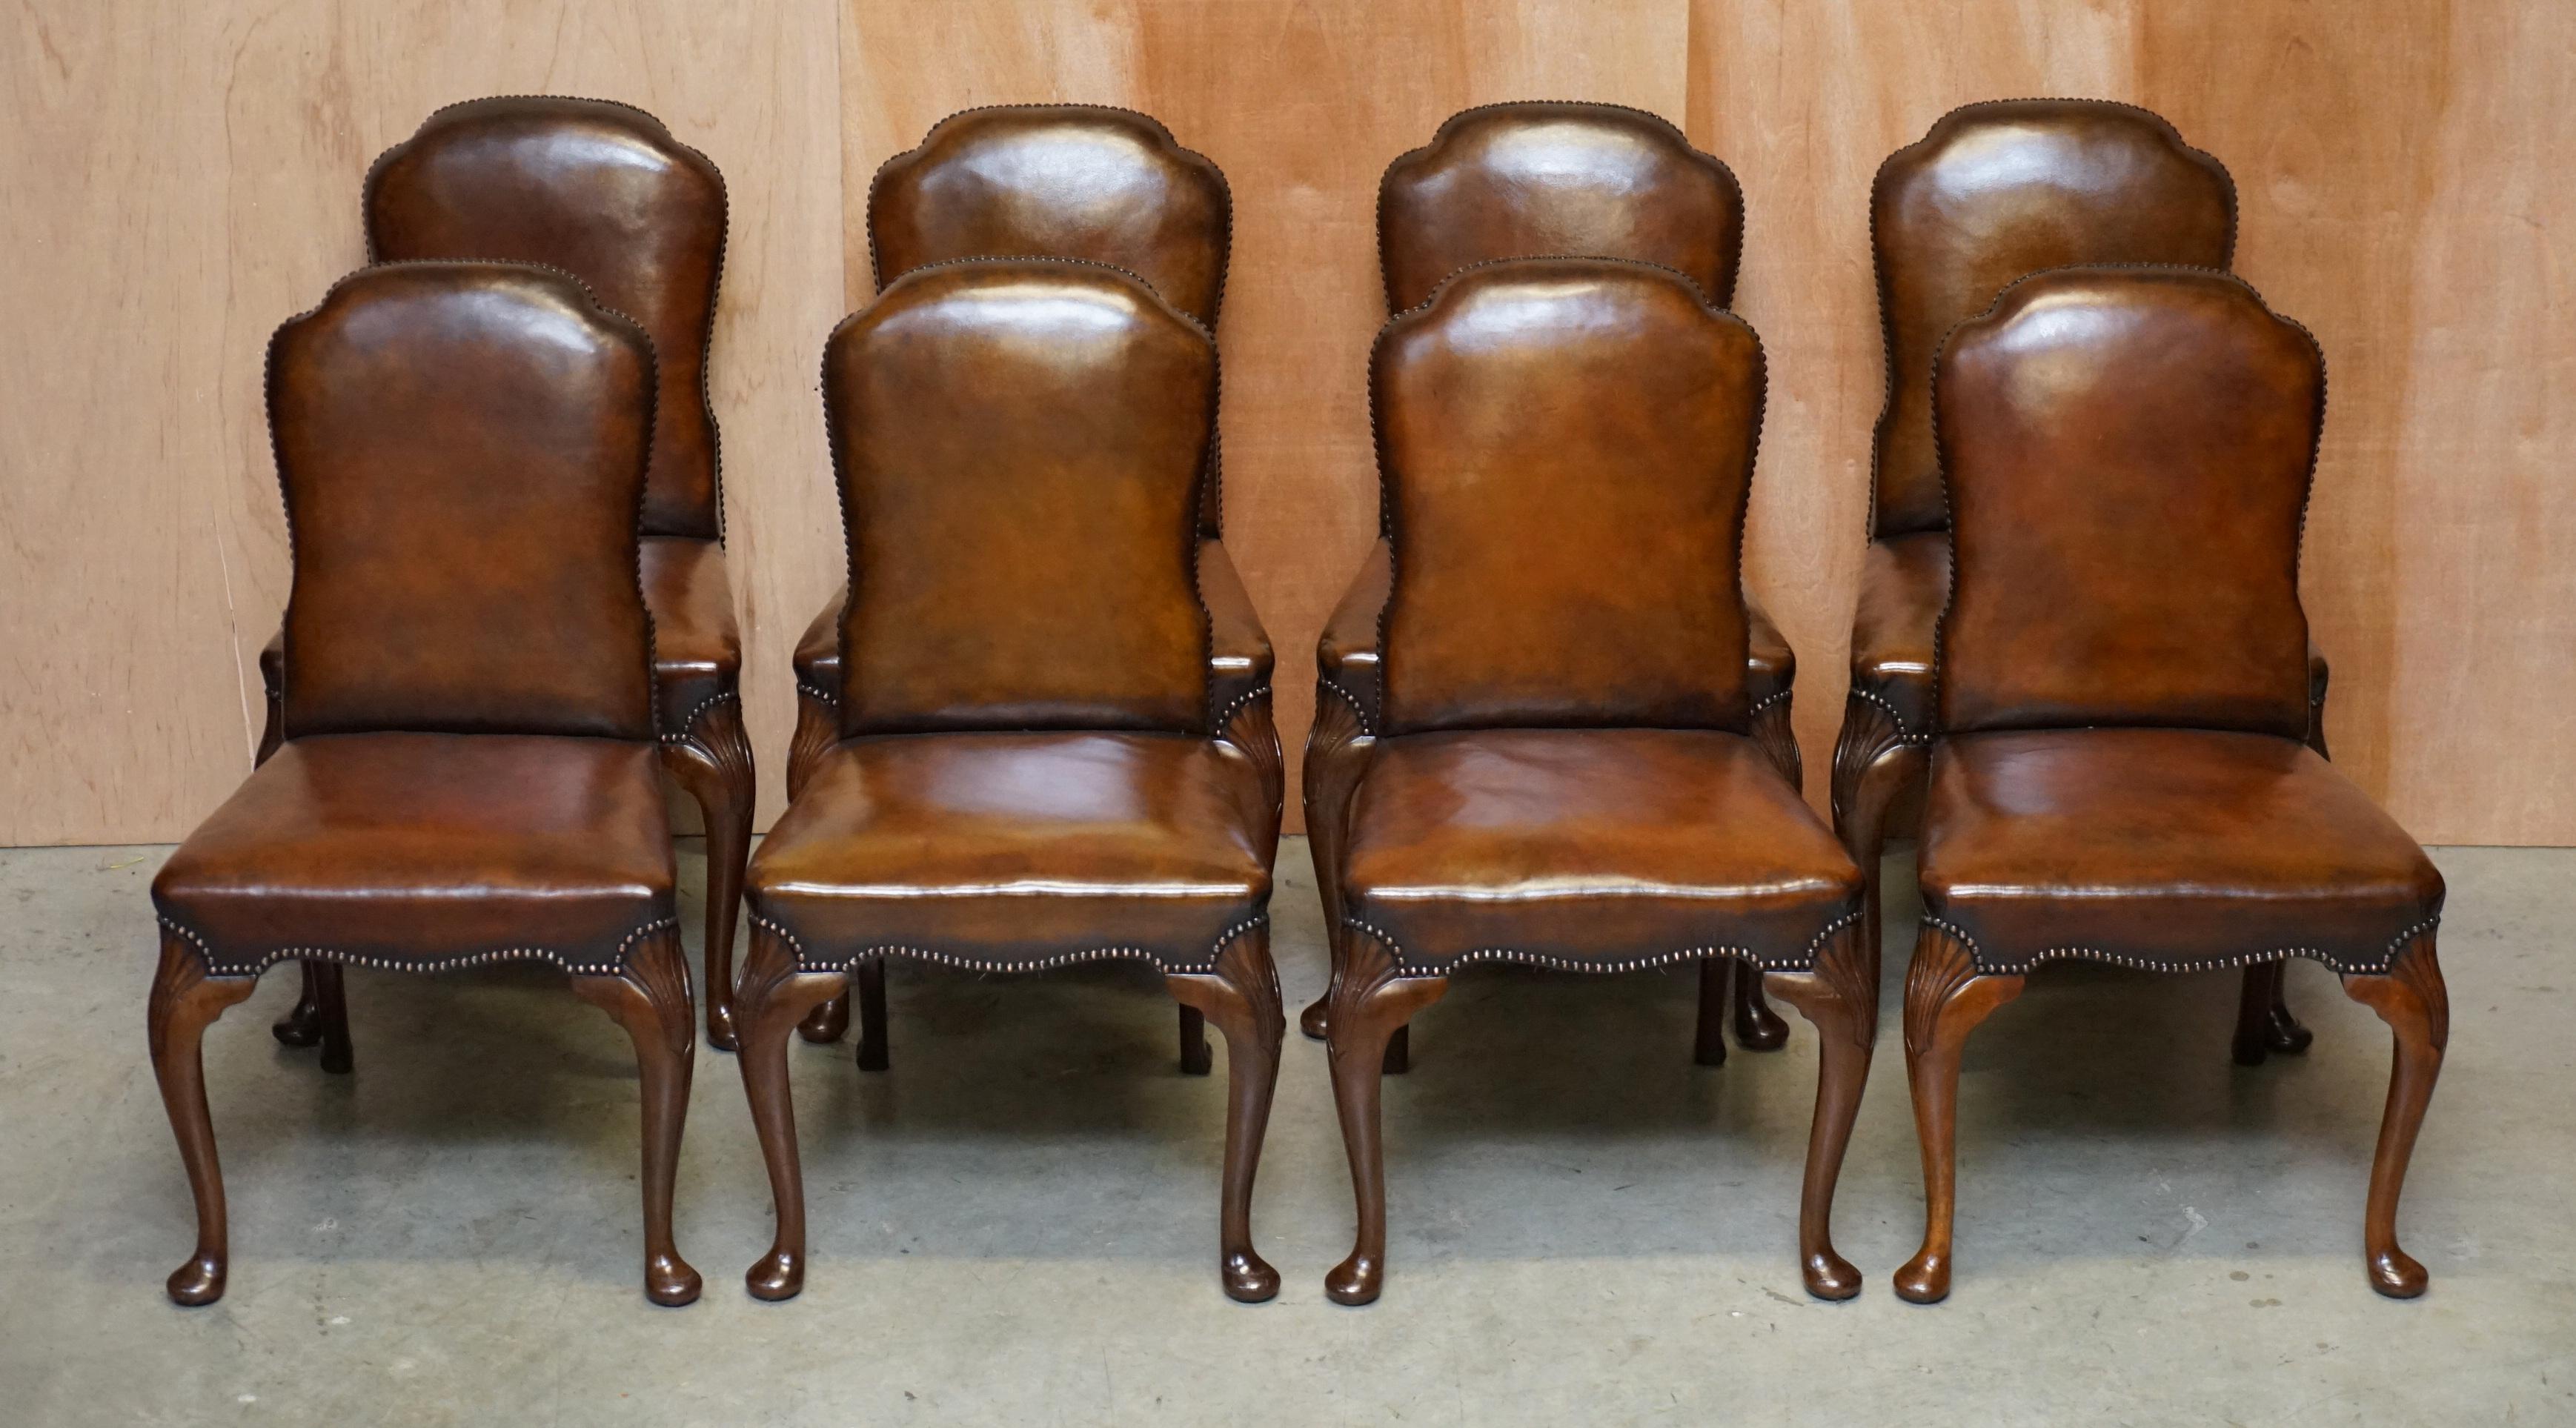 We are delighted to offer for sale this very rare suite of ten original fully restored Victoria Walnut framed cabriolet legged dining chairs with cigar brown leather upholstery 

These chairs are available as a set of ten, I also have a set of six